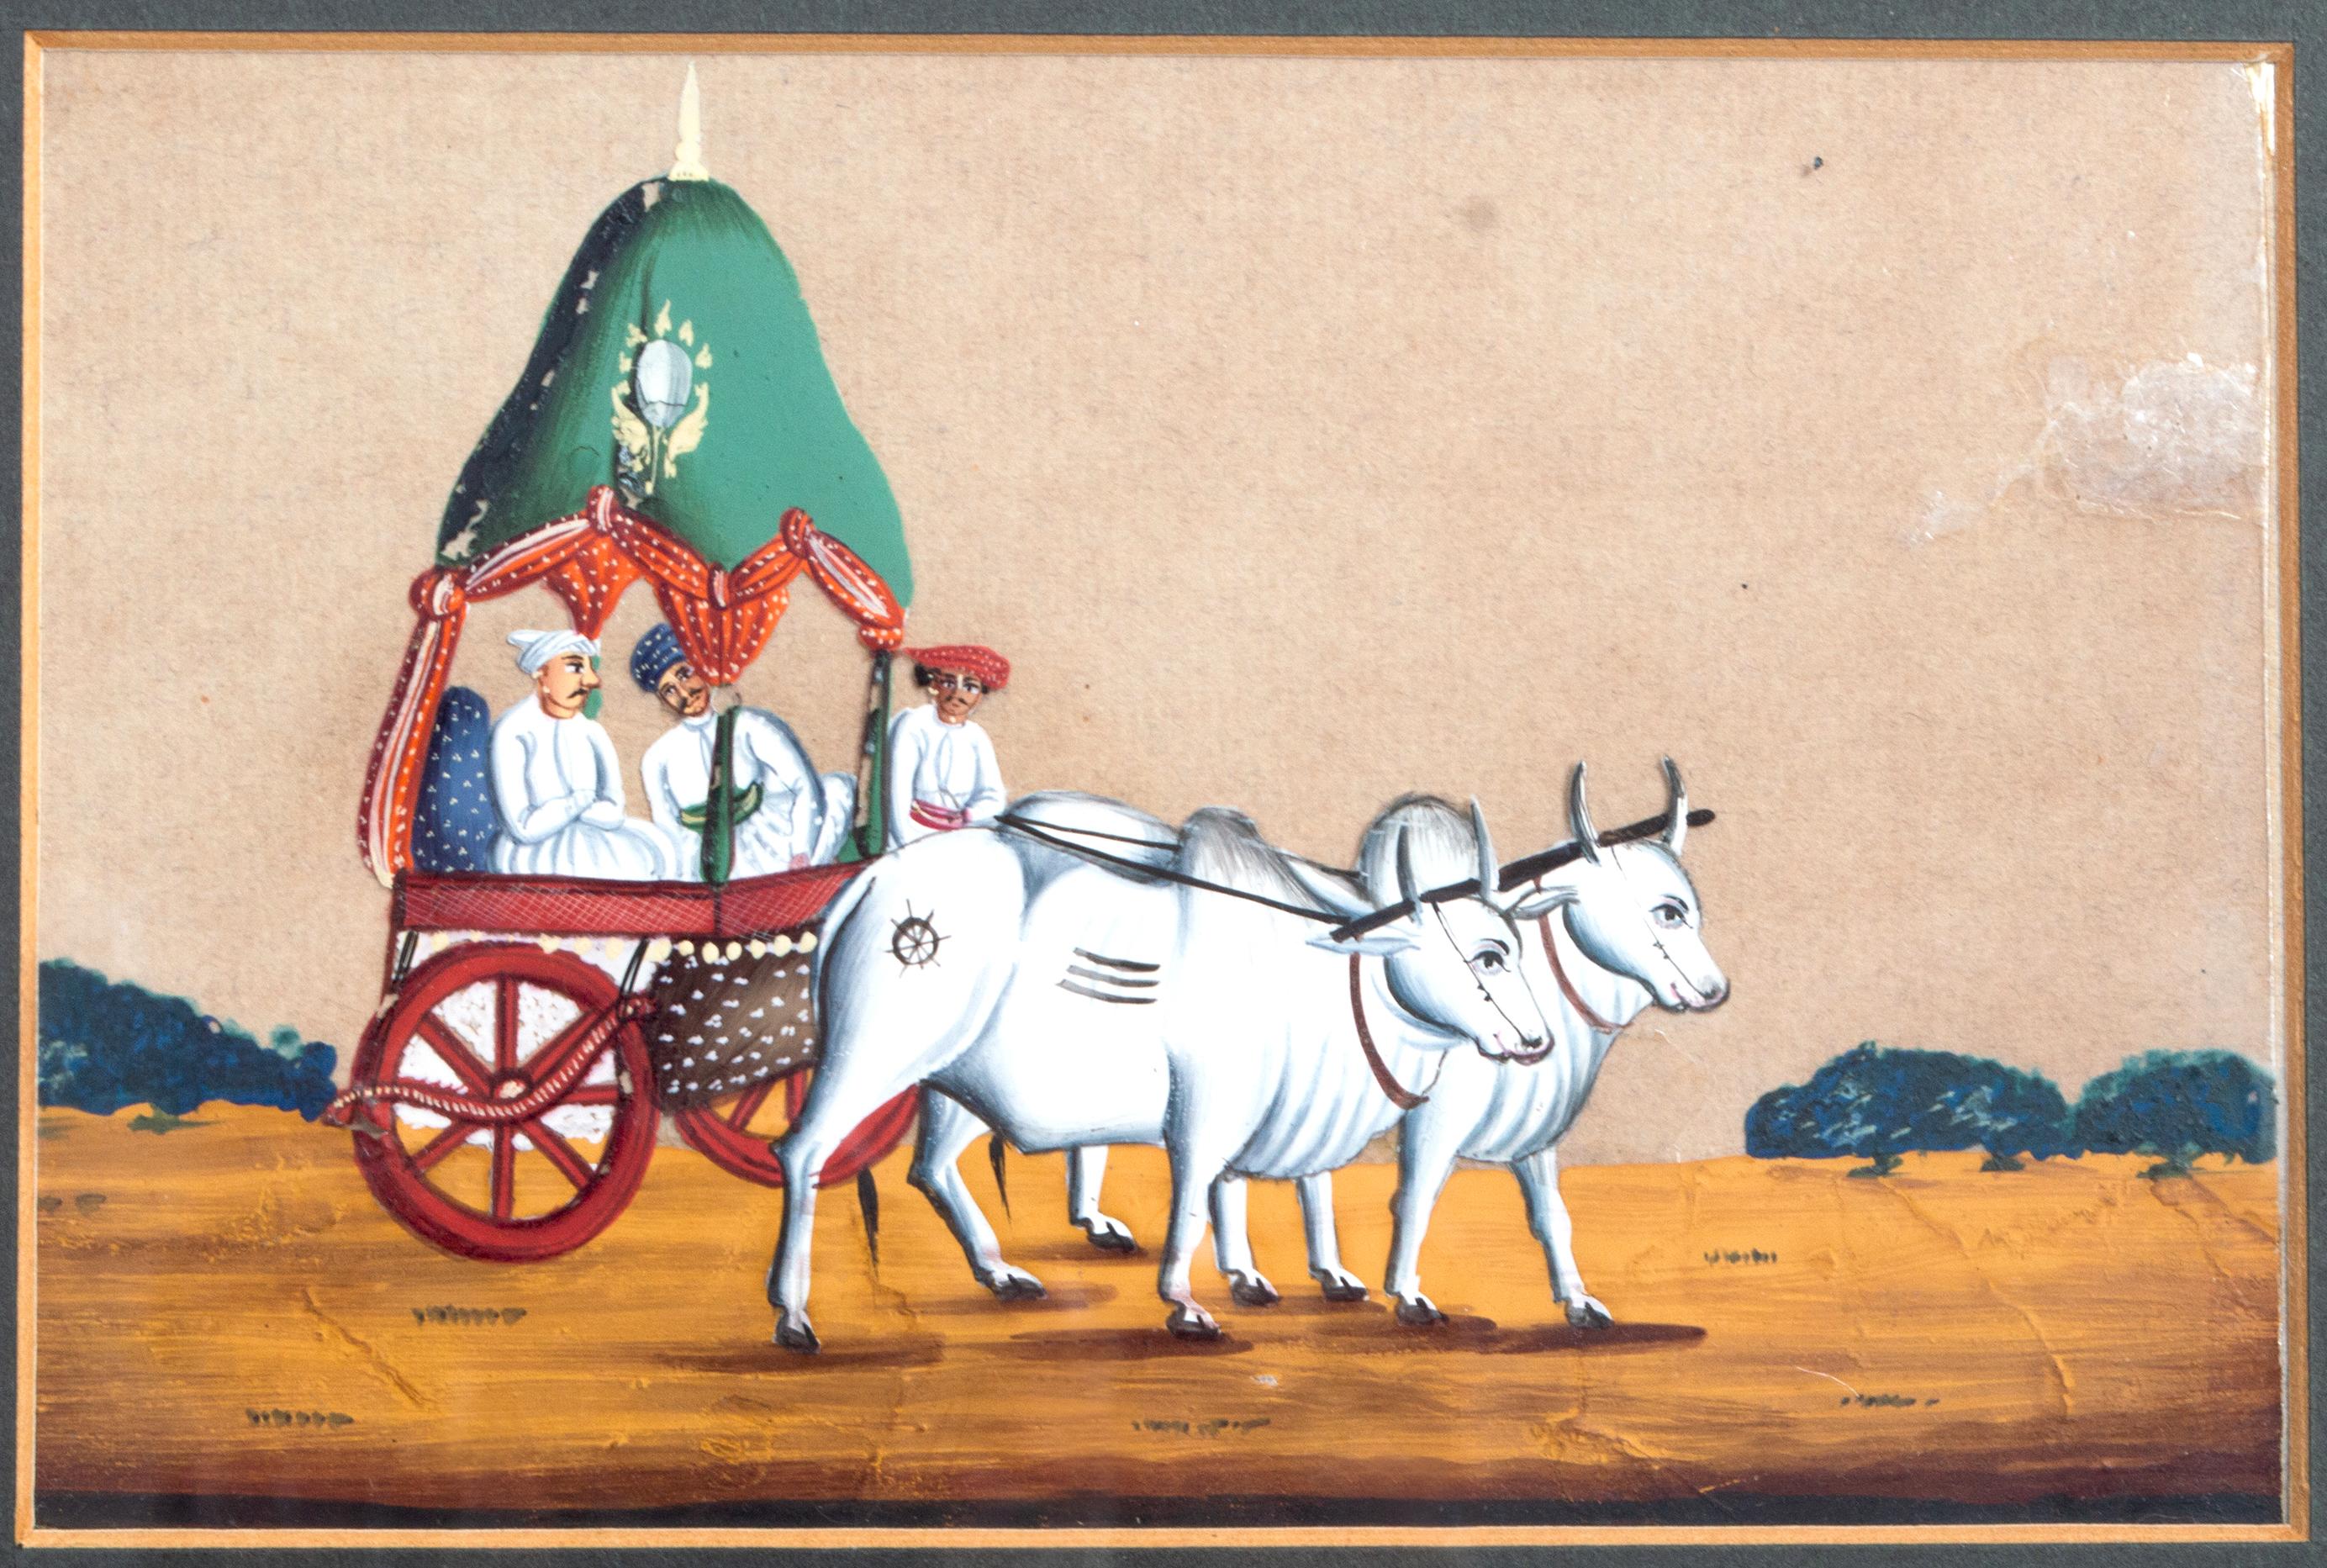 Pair Antique 19th Century Indian Miniature Mica Paintings C.1830
Indian Company School

A pair of 19th Century Indian mica gouache paintings on mica.
Depicting the water carrier and of a Purdah bullock cart with two men seated beneath a domed